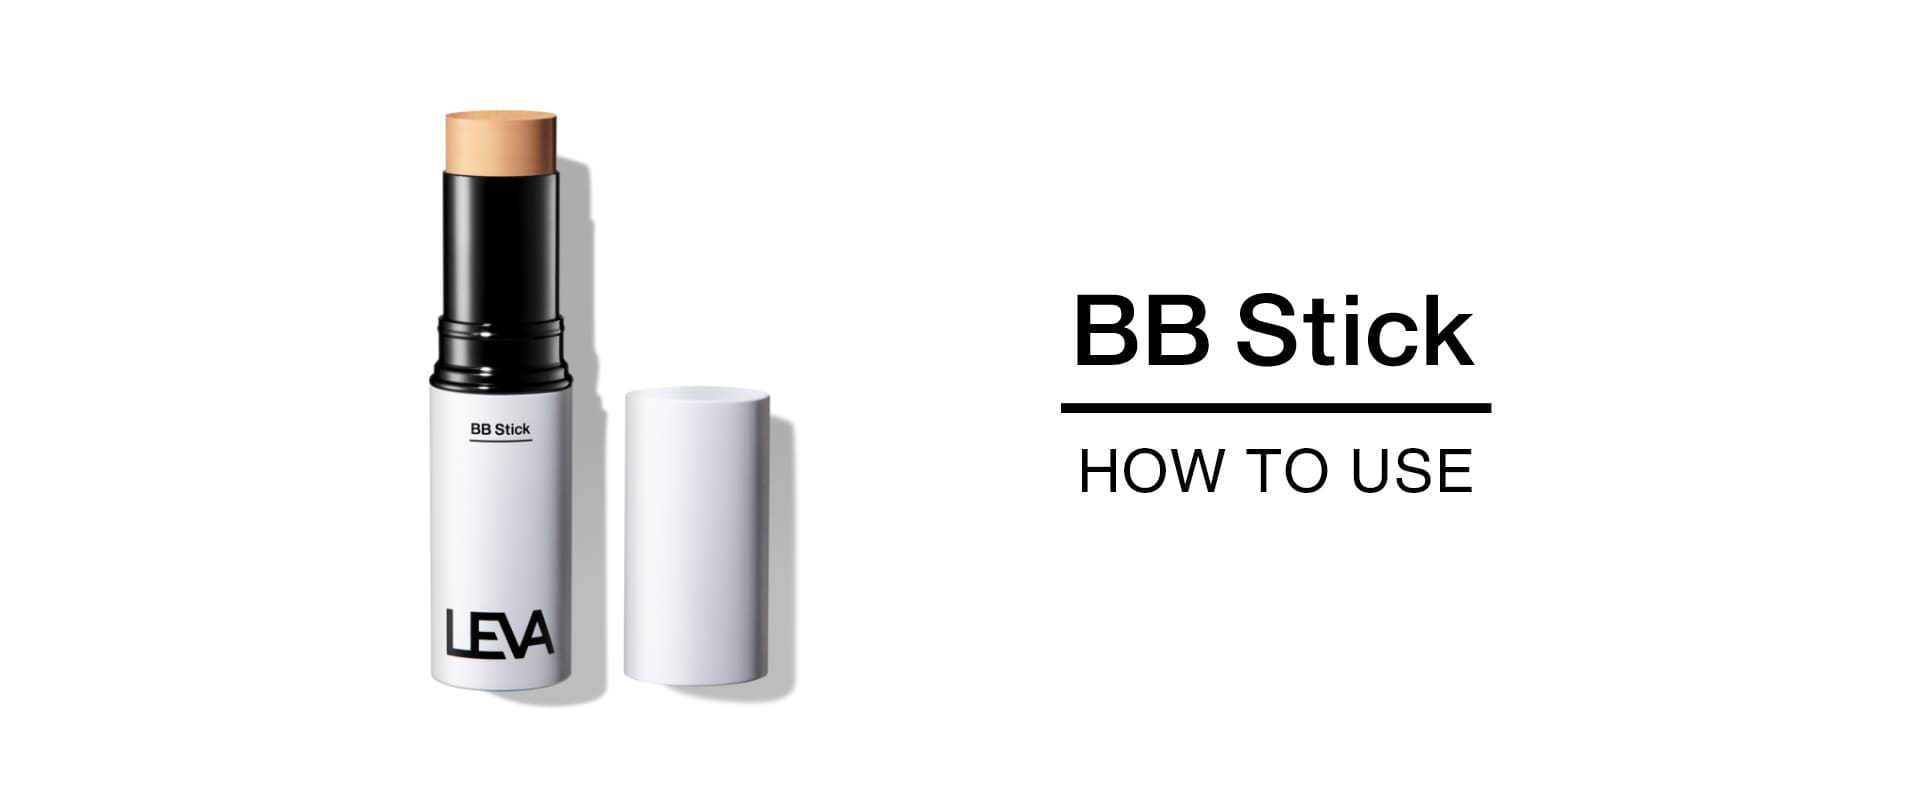 BB Stick HOW TO USE